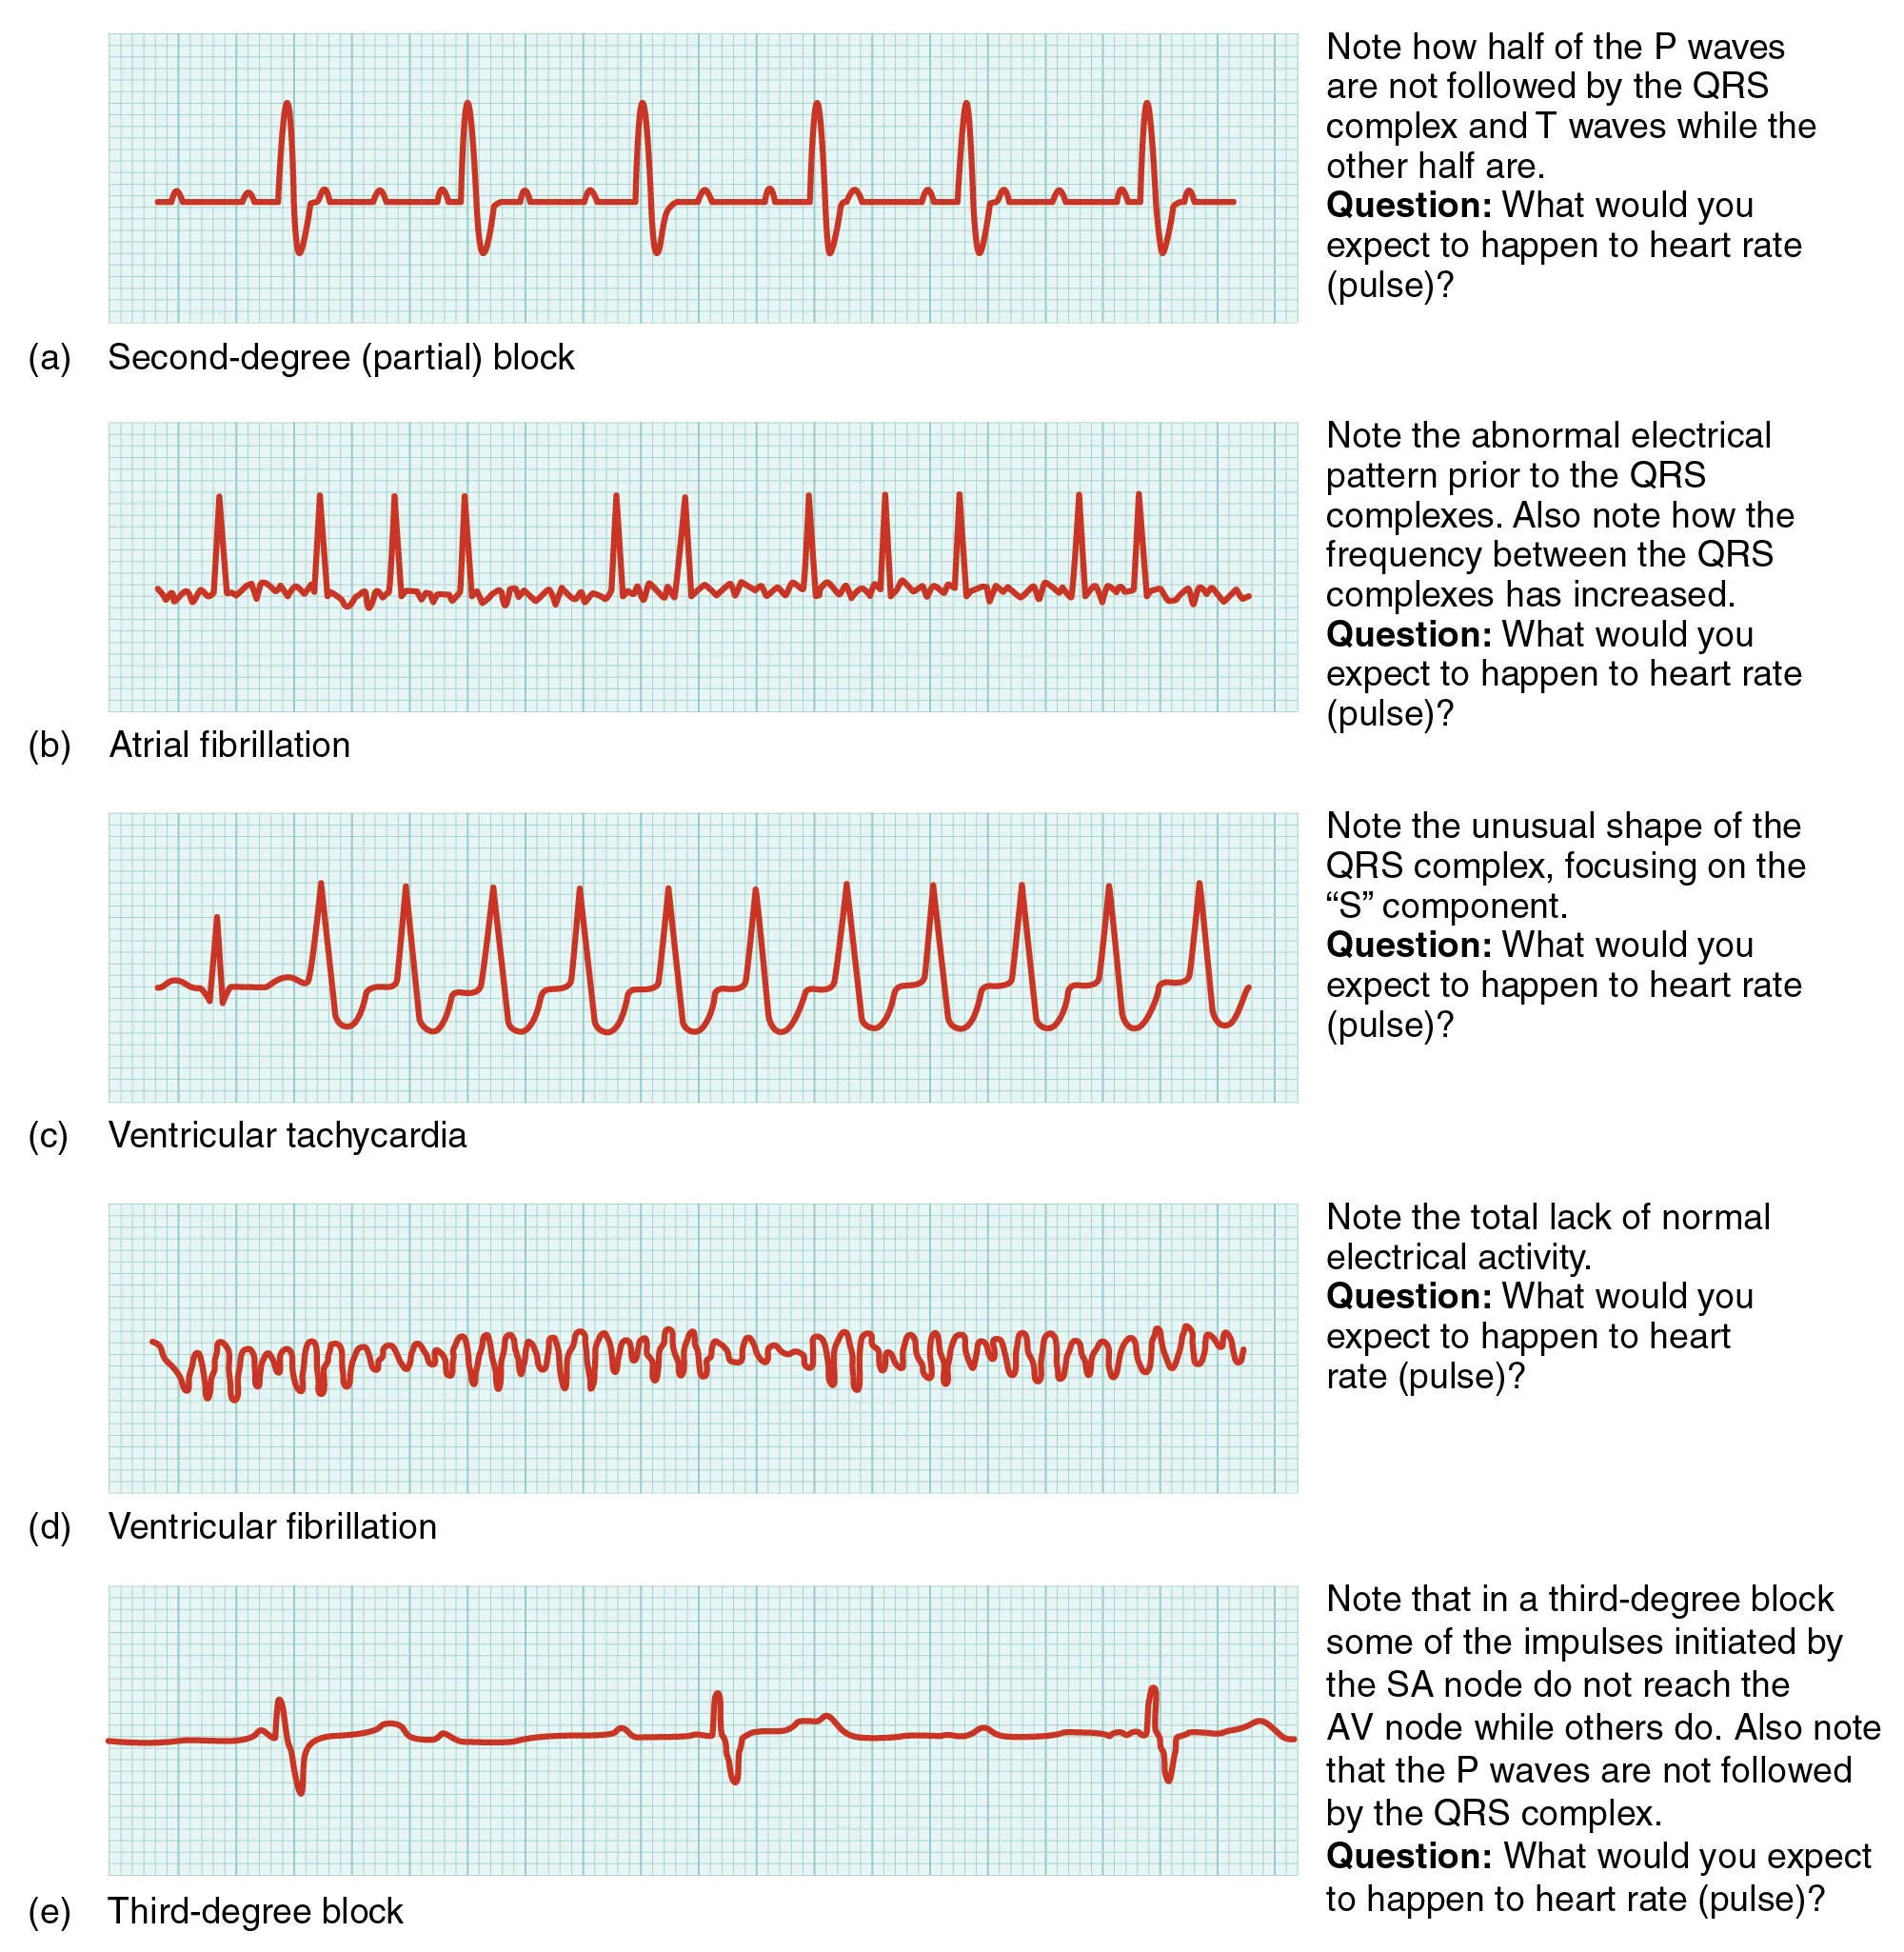 In this image the QT cycle for different heart conditions are shown. From top to bottom, the arrhythmias shown are second-degree partial block, atrial fibrillation, ventricular tachycardia, ventricular fibrillation and third degree block.